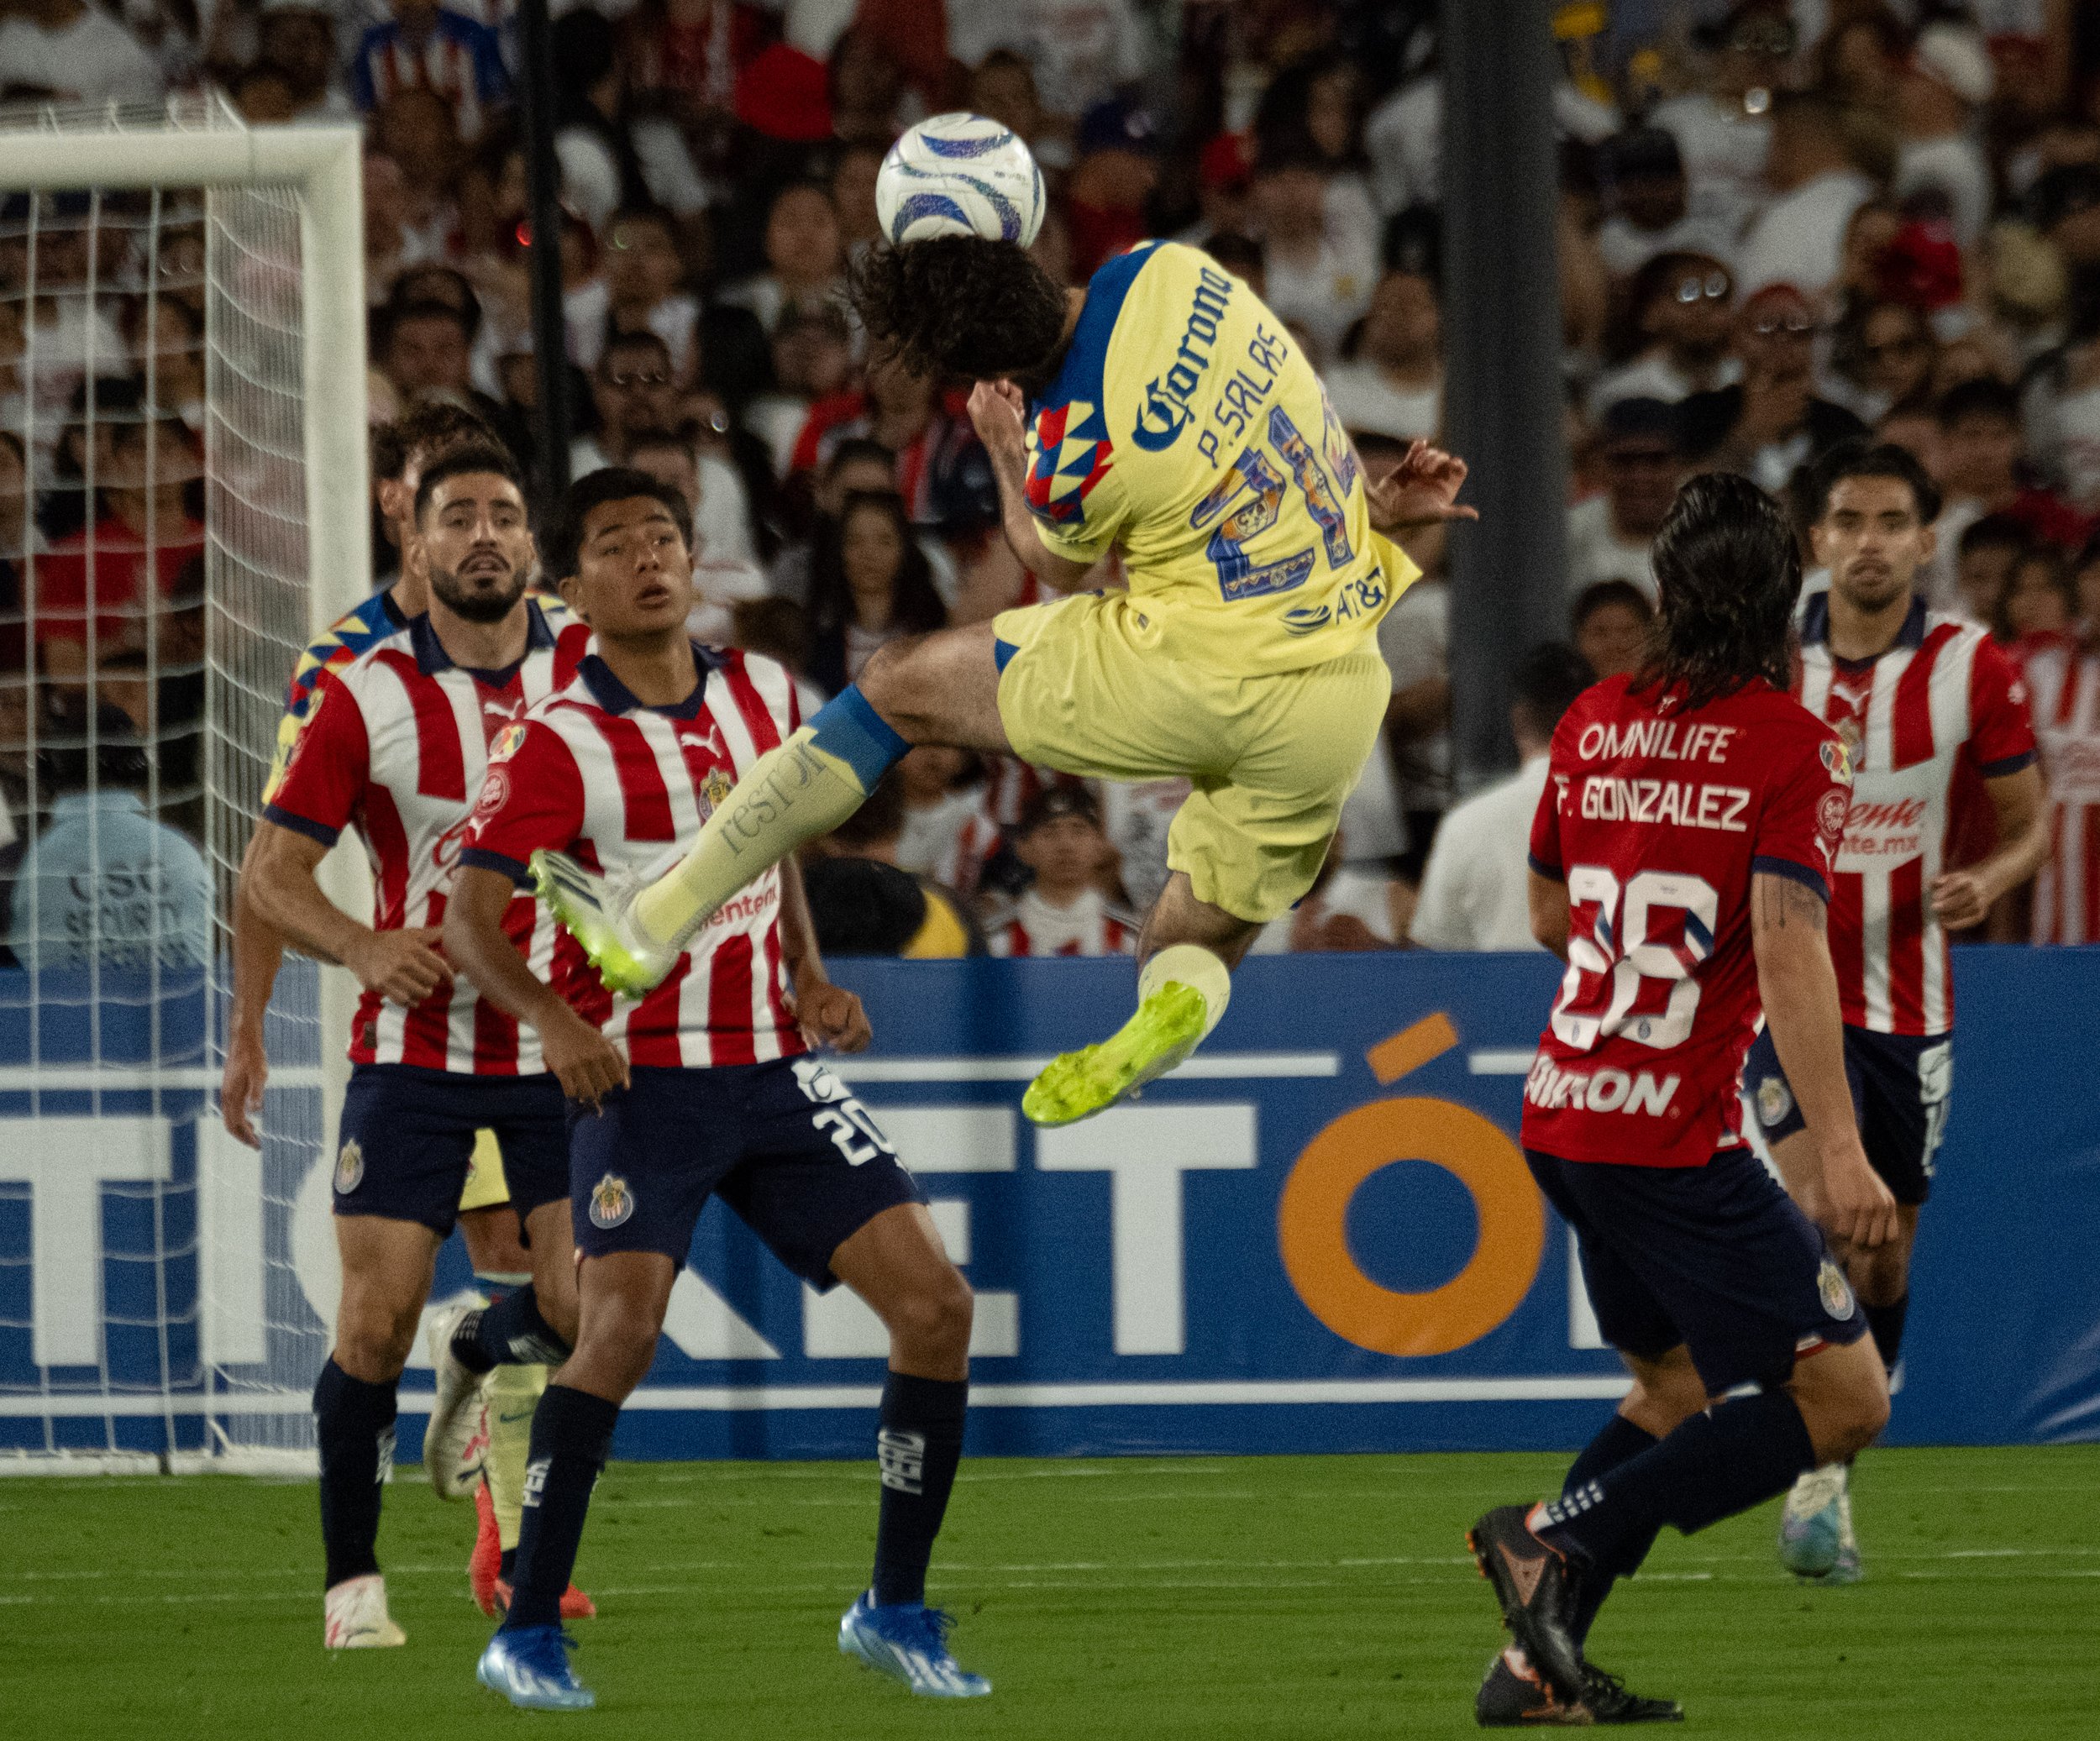  Club America forward Patricio Salas jumping for the ball at the Rose Bowl in Pasadena, Calif. on Sunday, Oct. 15. (Danilo Perez | The Corsair) 